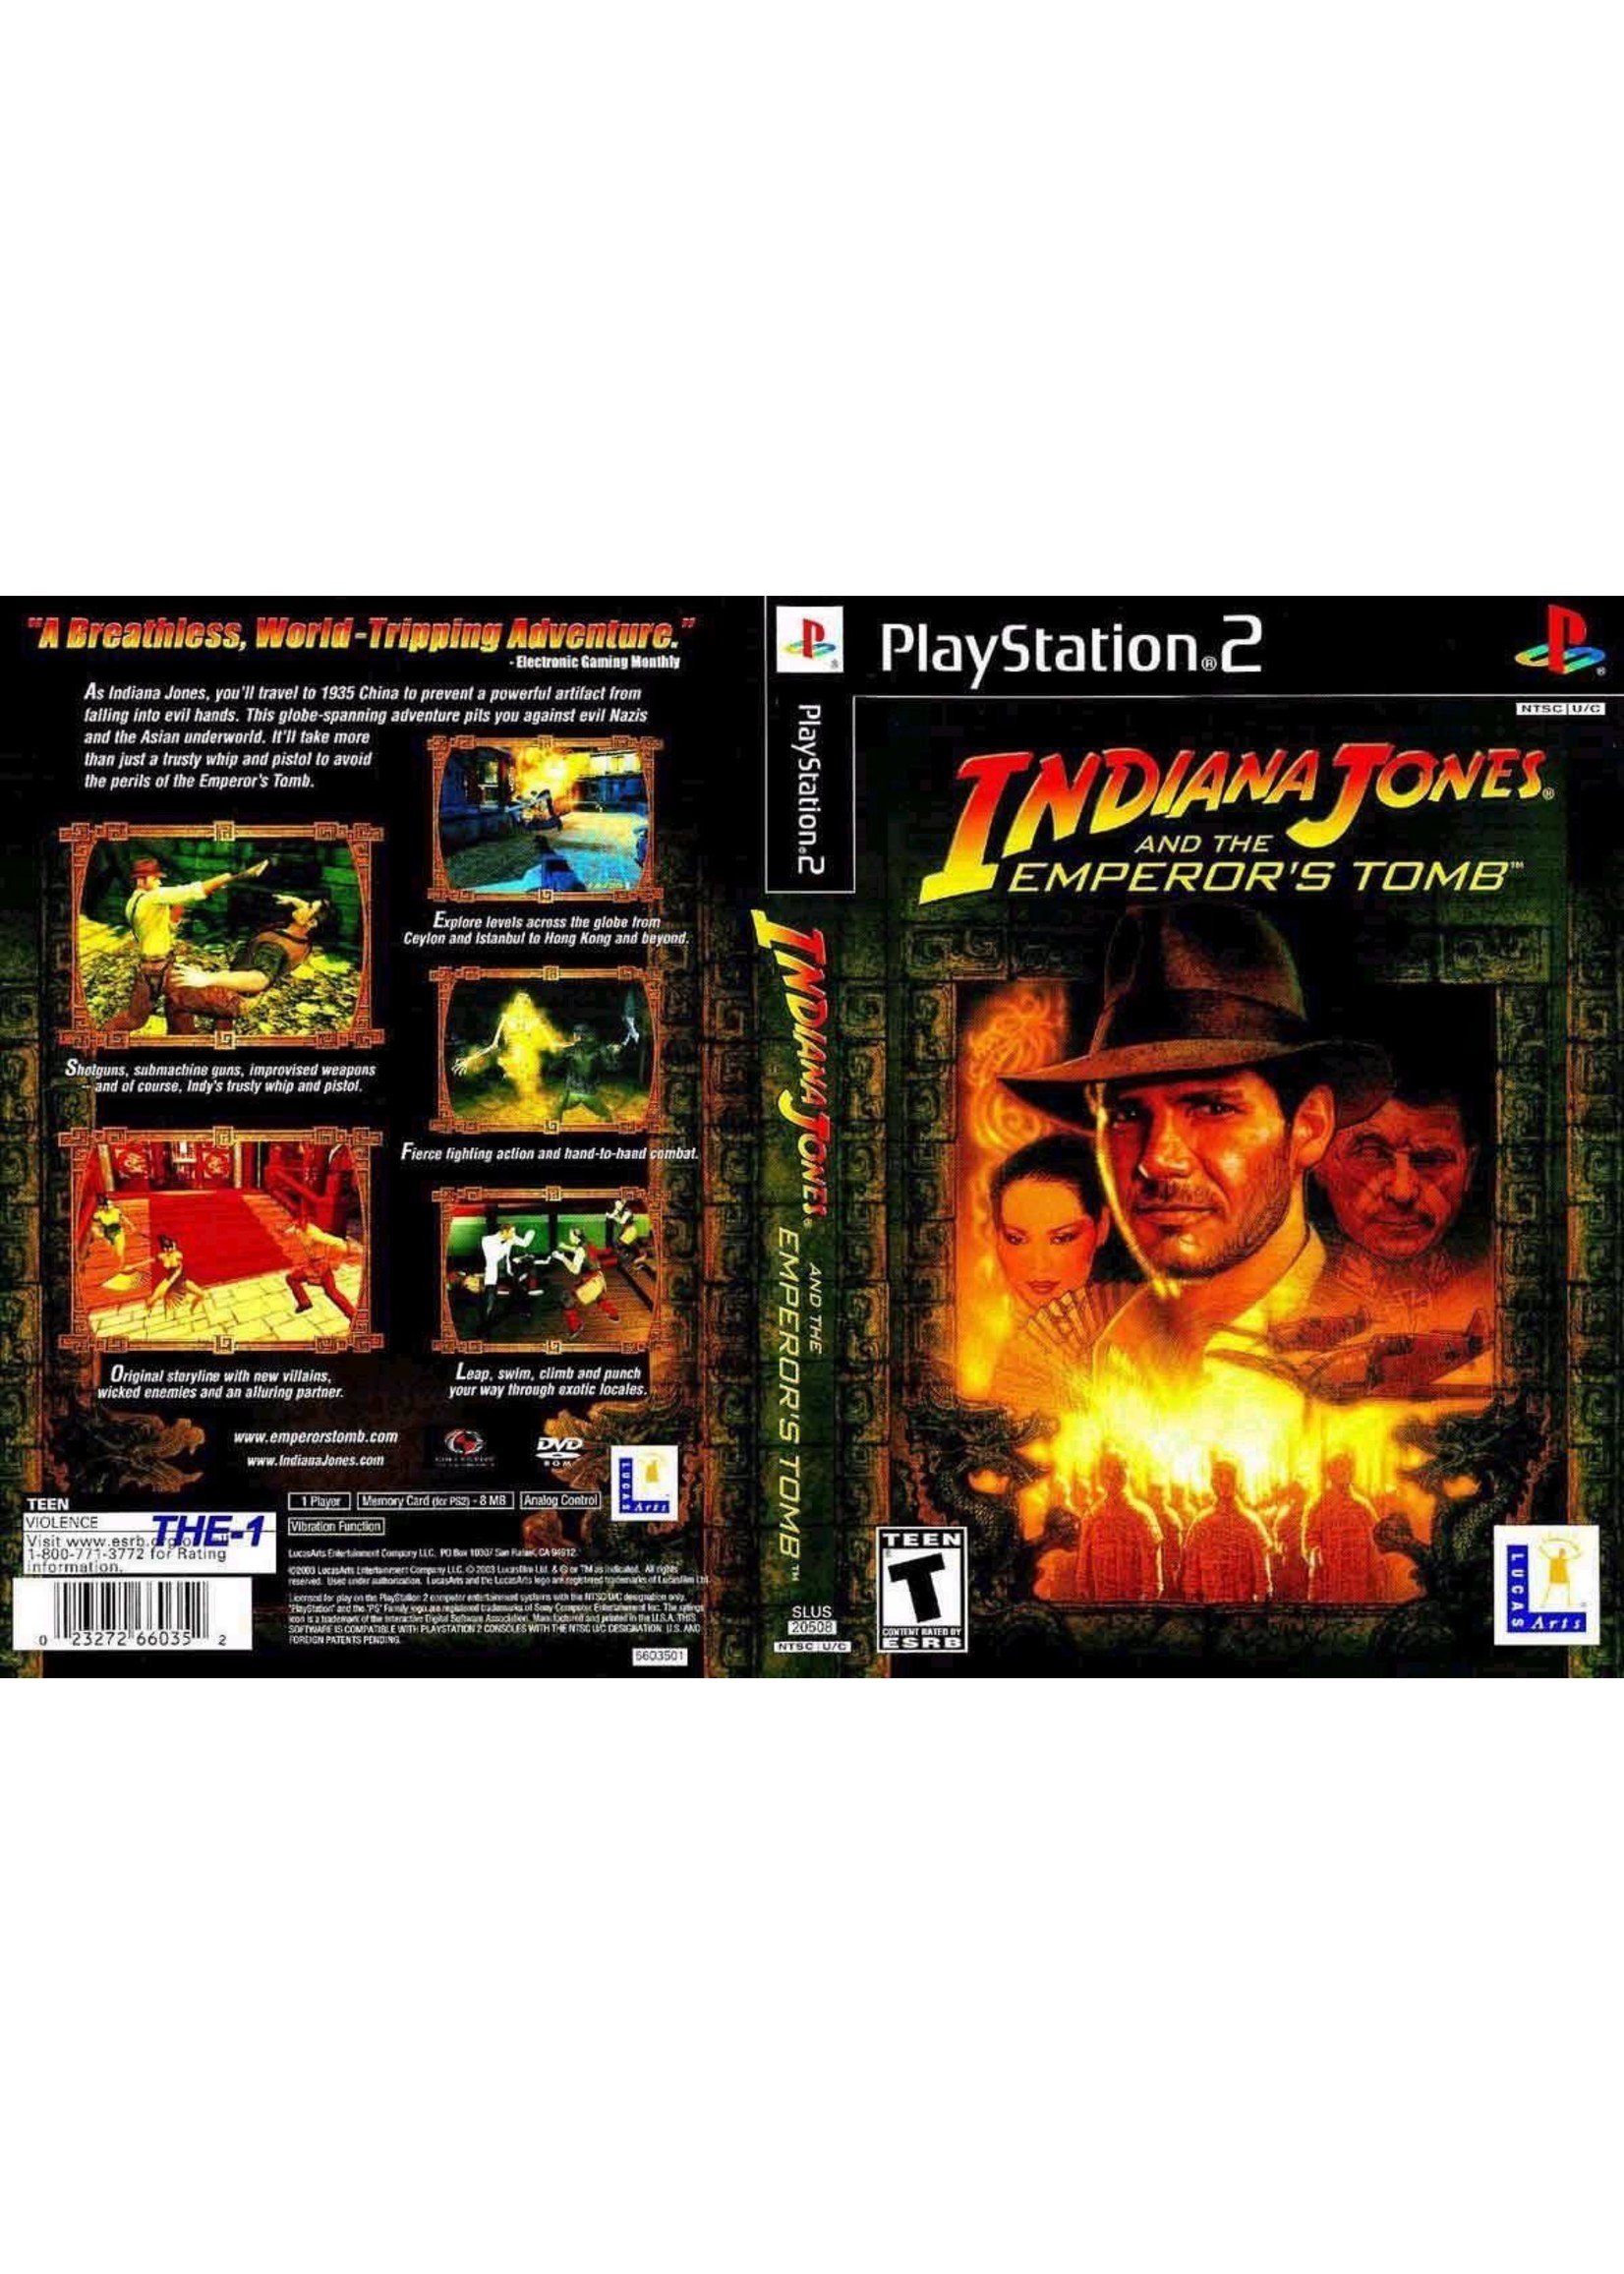 Sony Playstation 2 (PS2) Indiana Jones and the Emperor's Tomb